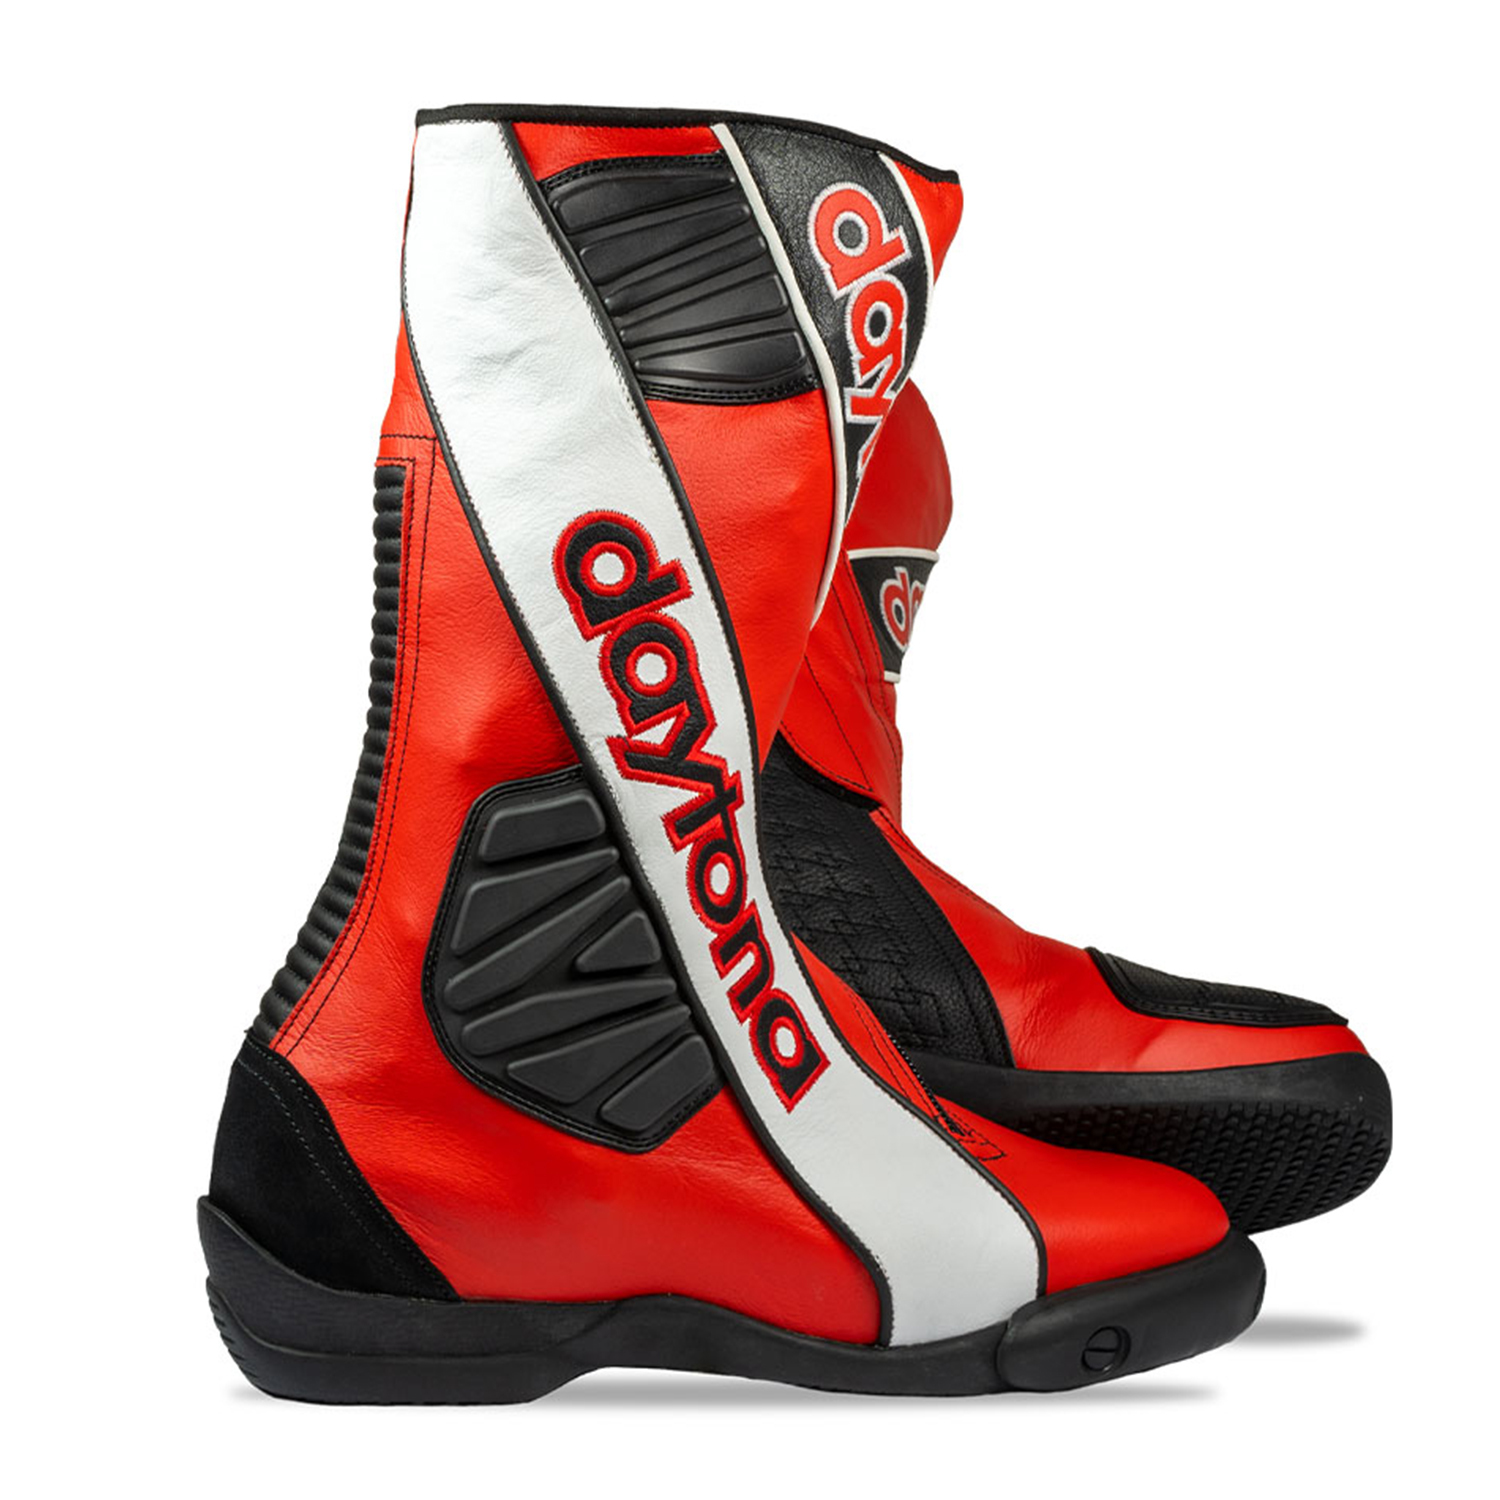 Daytona Security EVO G3 Boots Red-White-Black - Available in Various Sizes